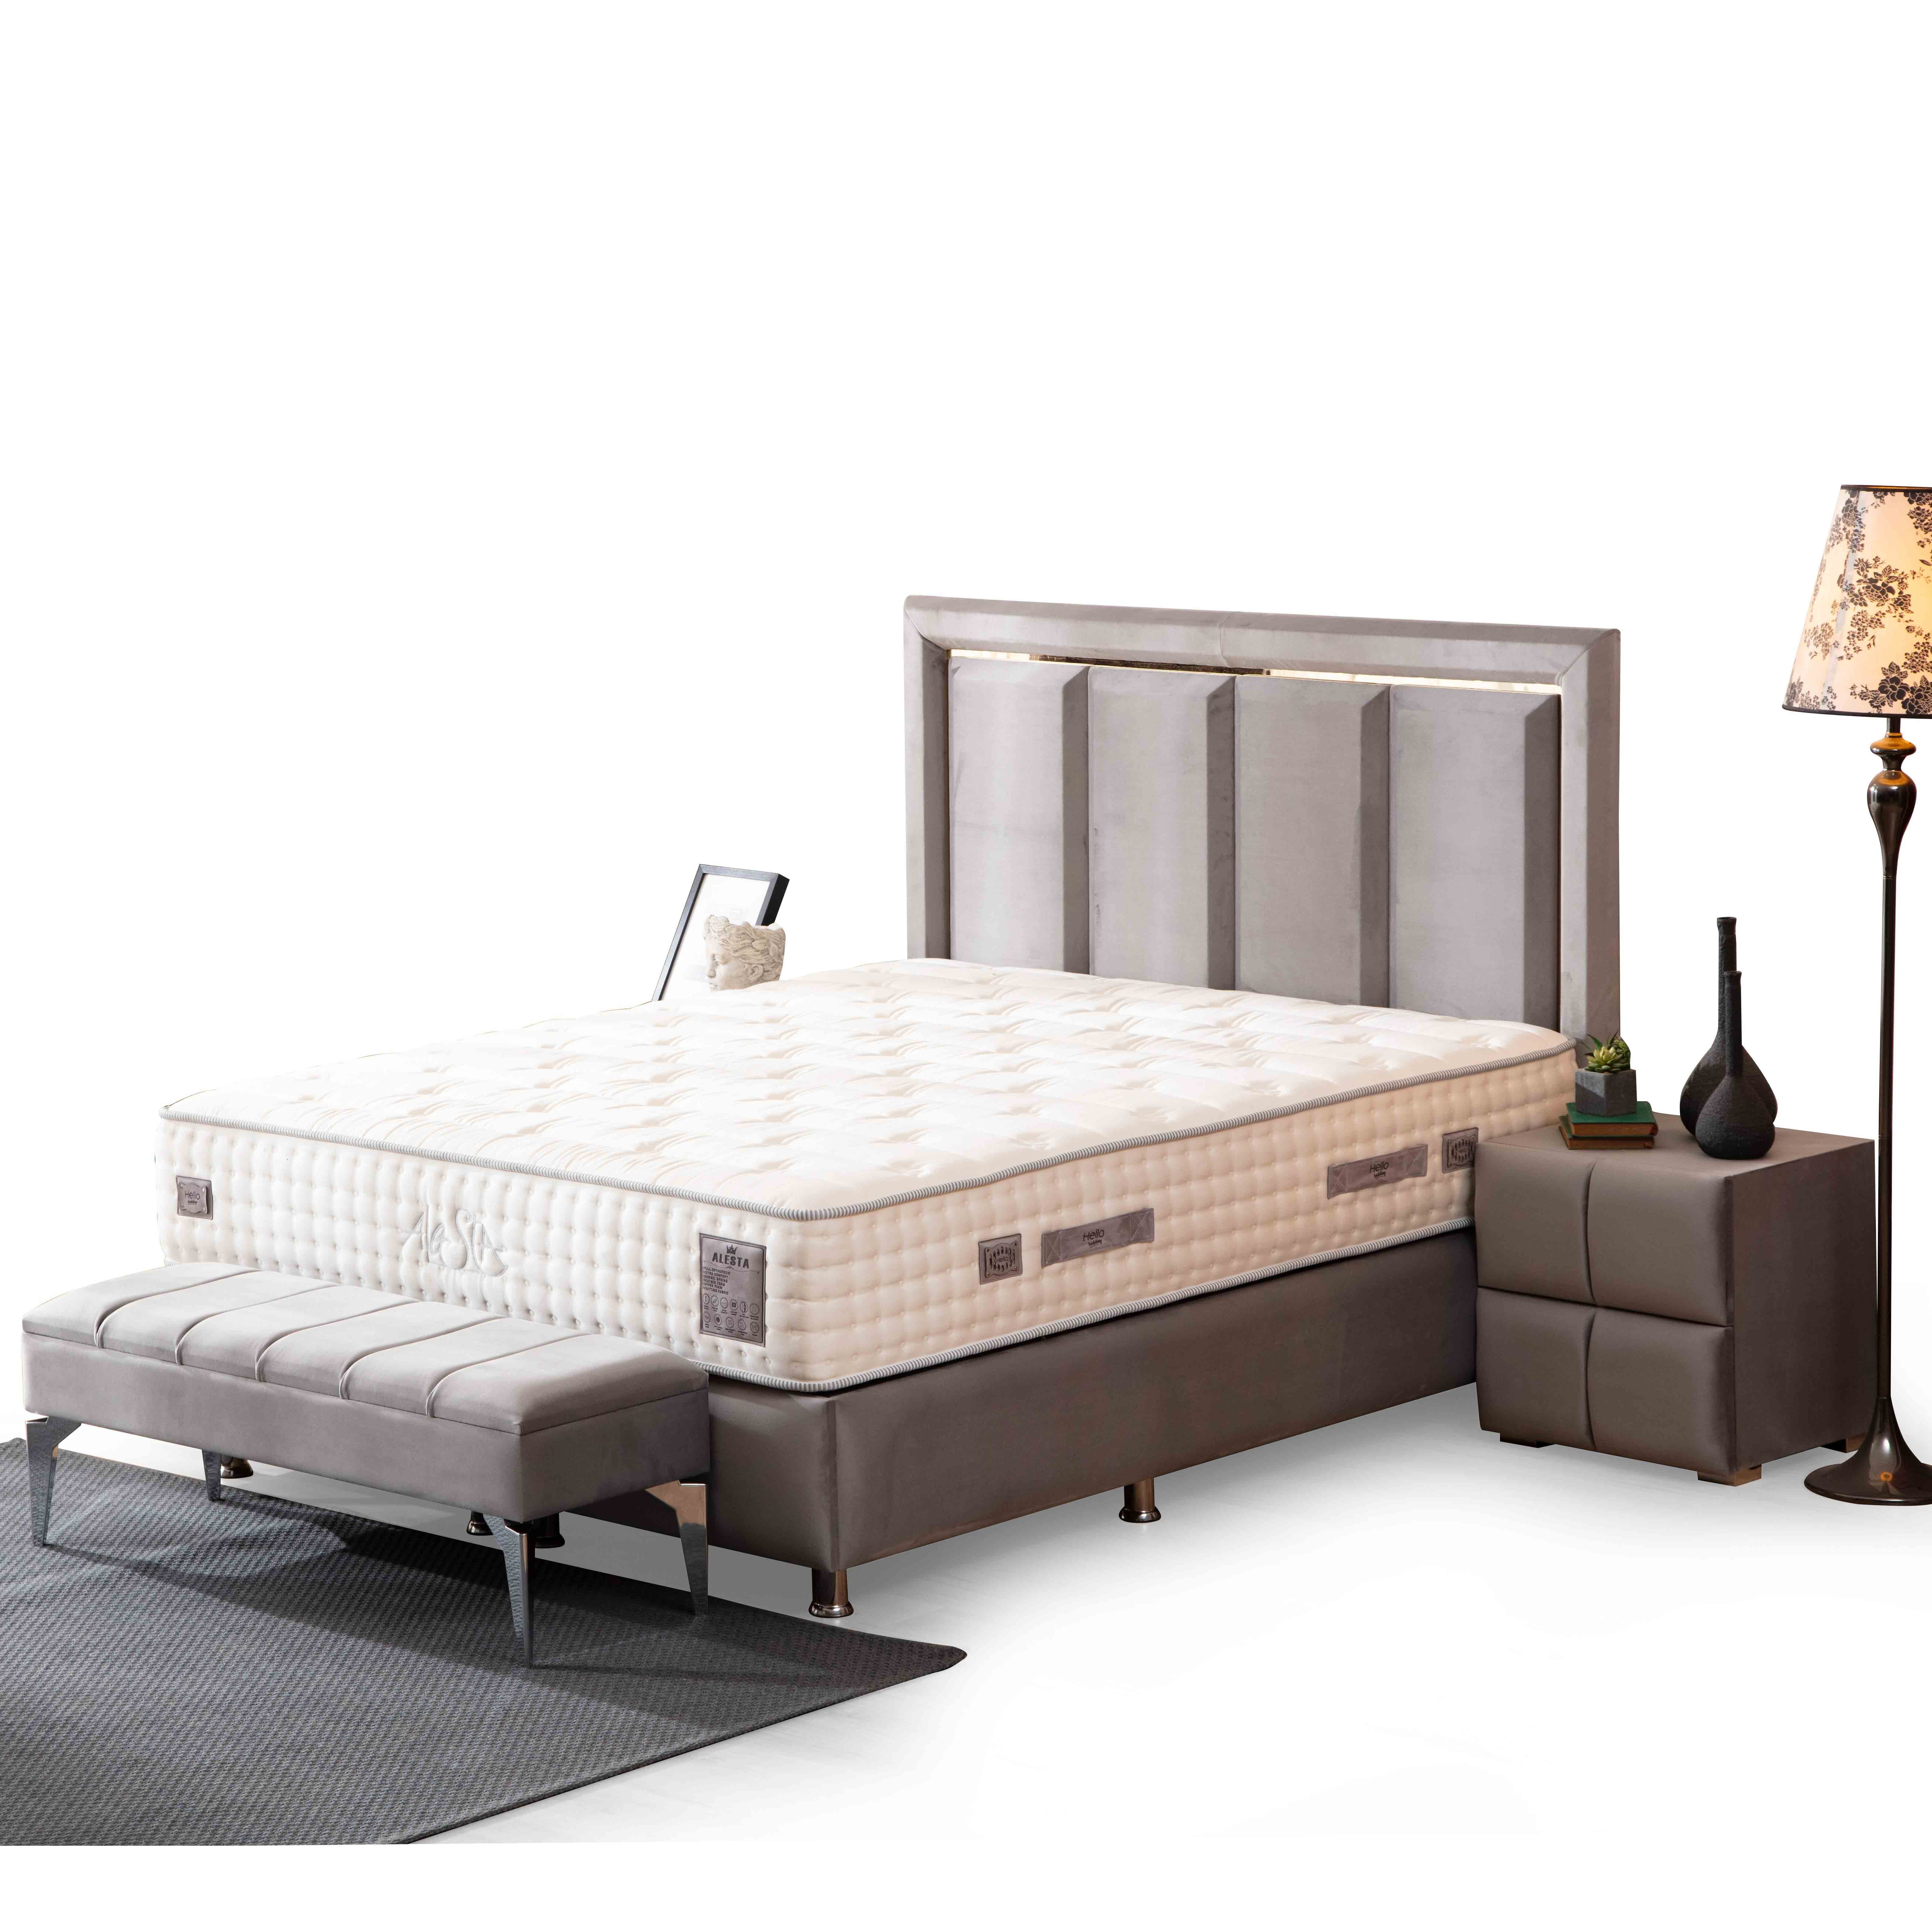 Bergama Bed With Storage 120*200